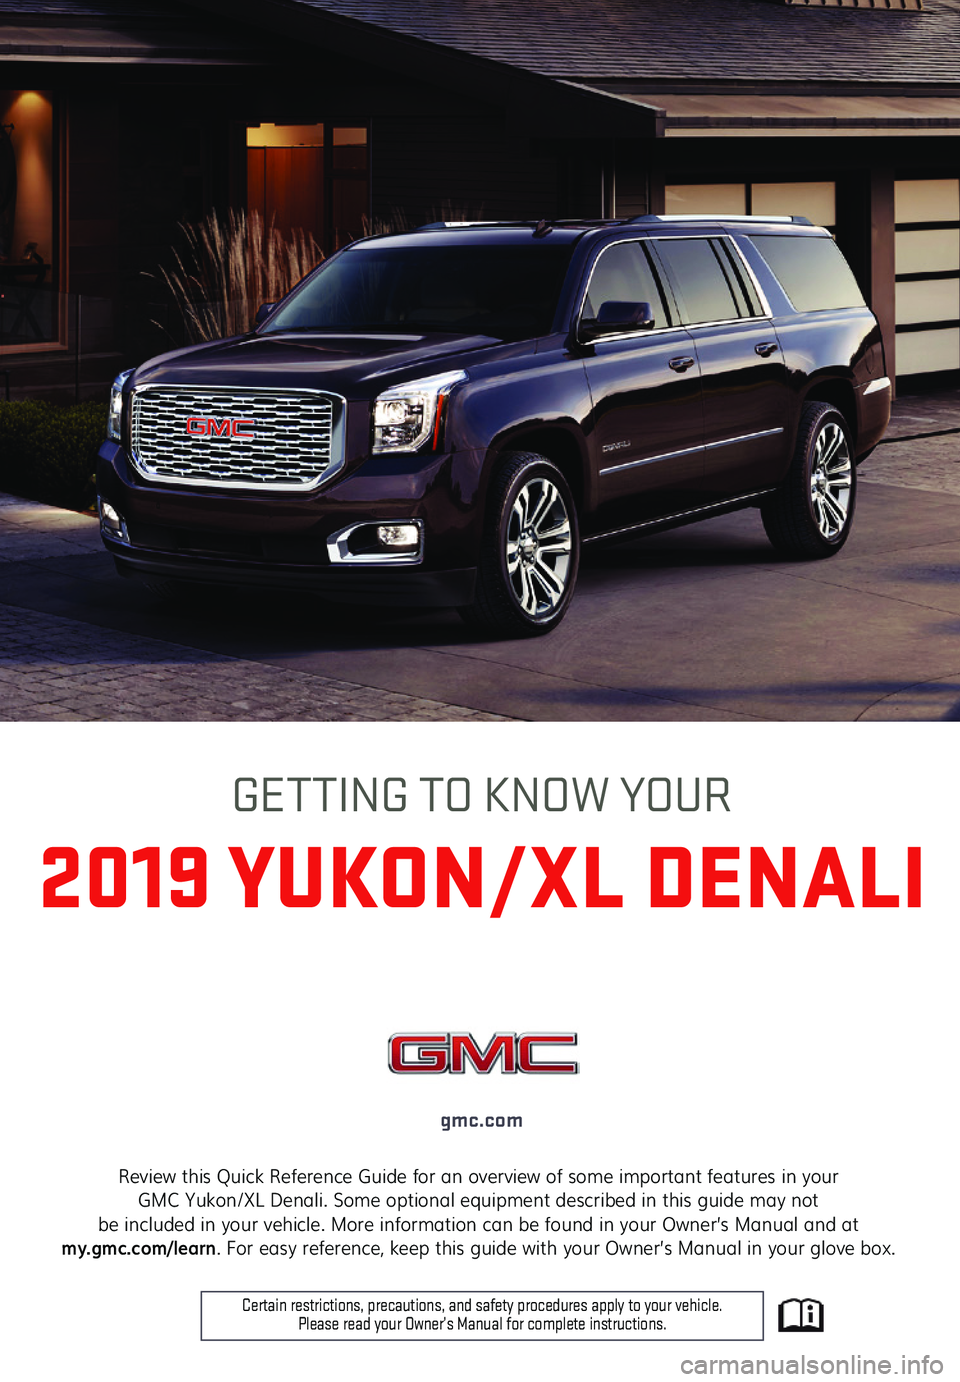 GMC YUKON 2019  Get To Know Guide 1
Review this Quick Reference Guide for an overview of some important features in your  GMC Yukon/XL Denali. Some optional equipment described in this guide may not  be included in your vehicle. More 